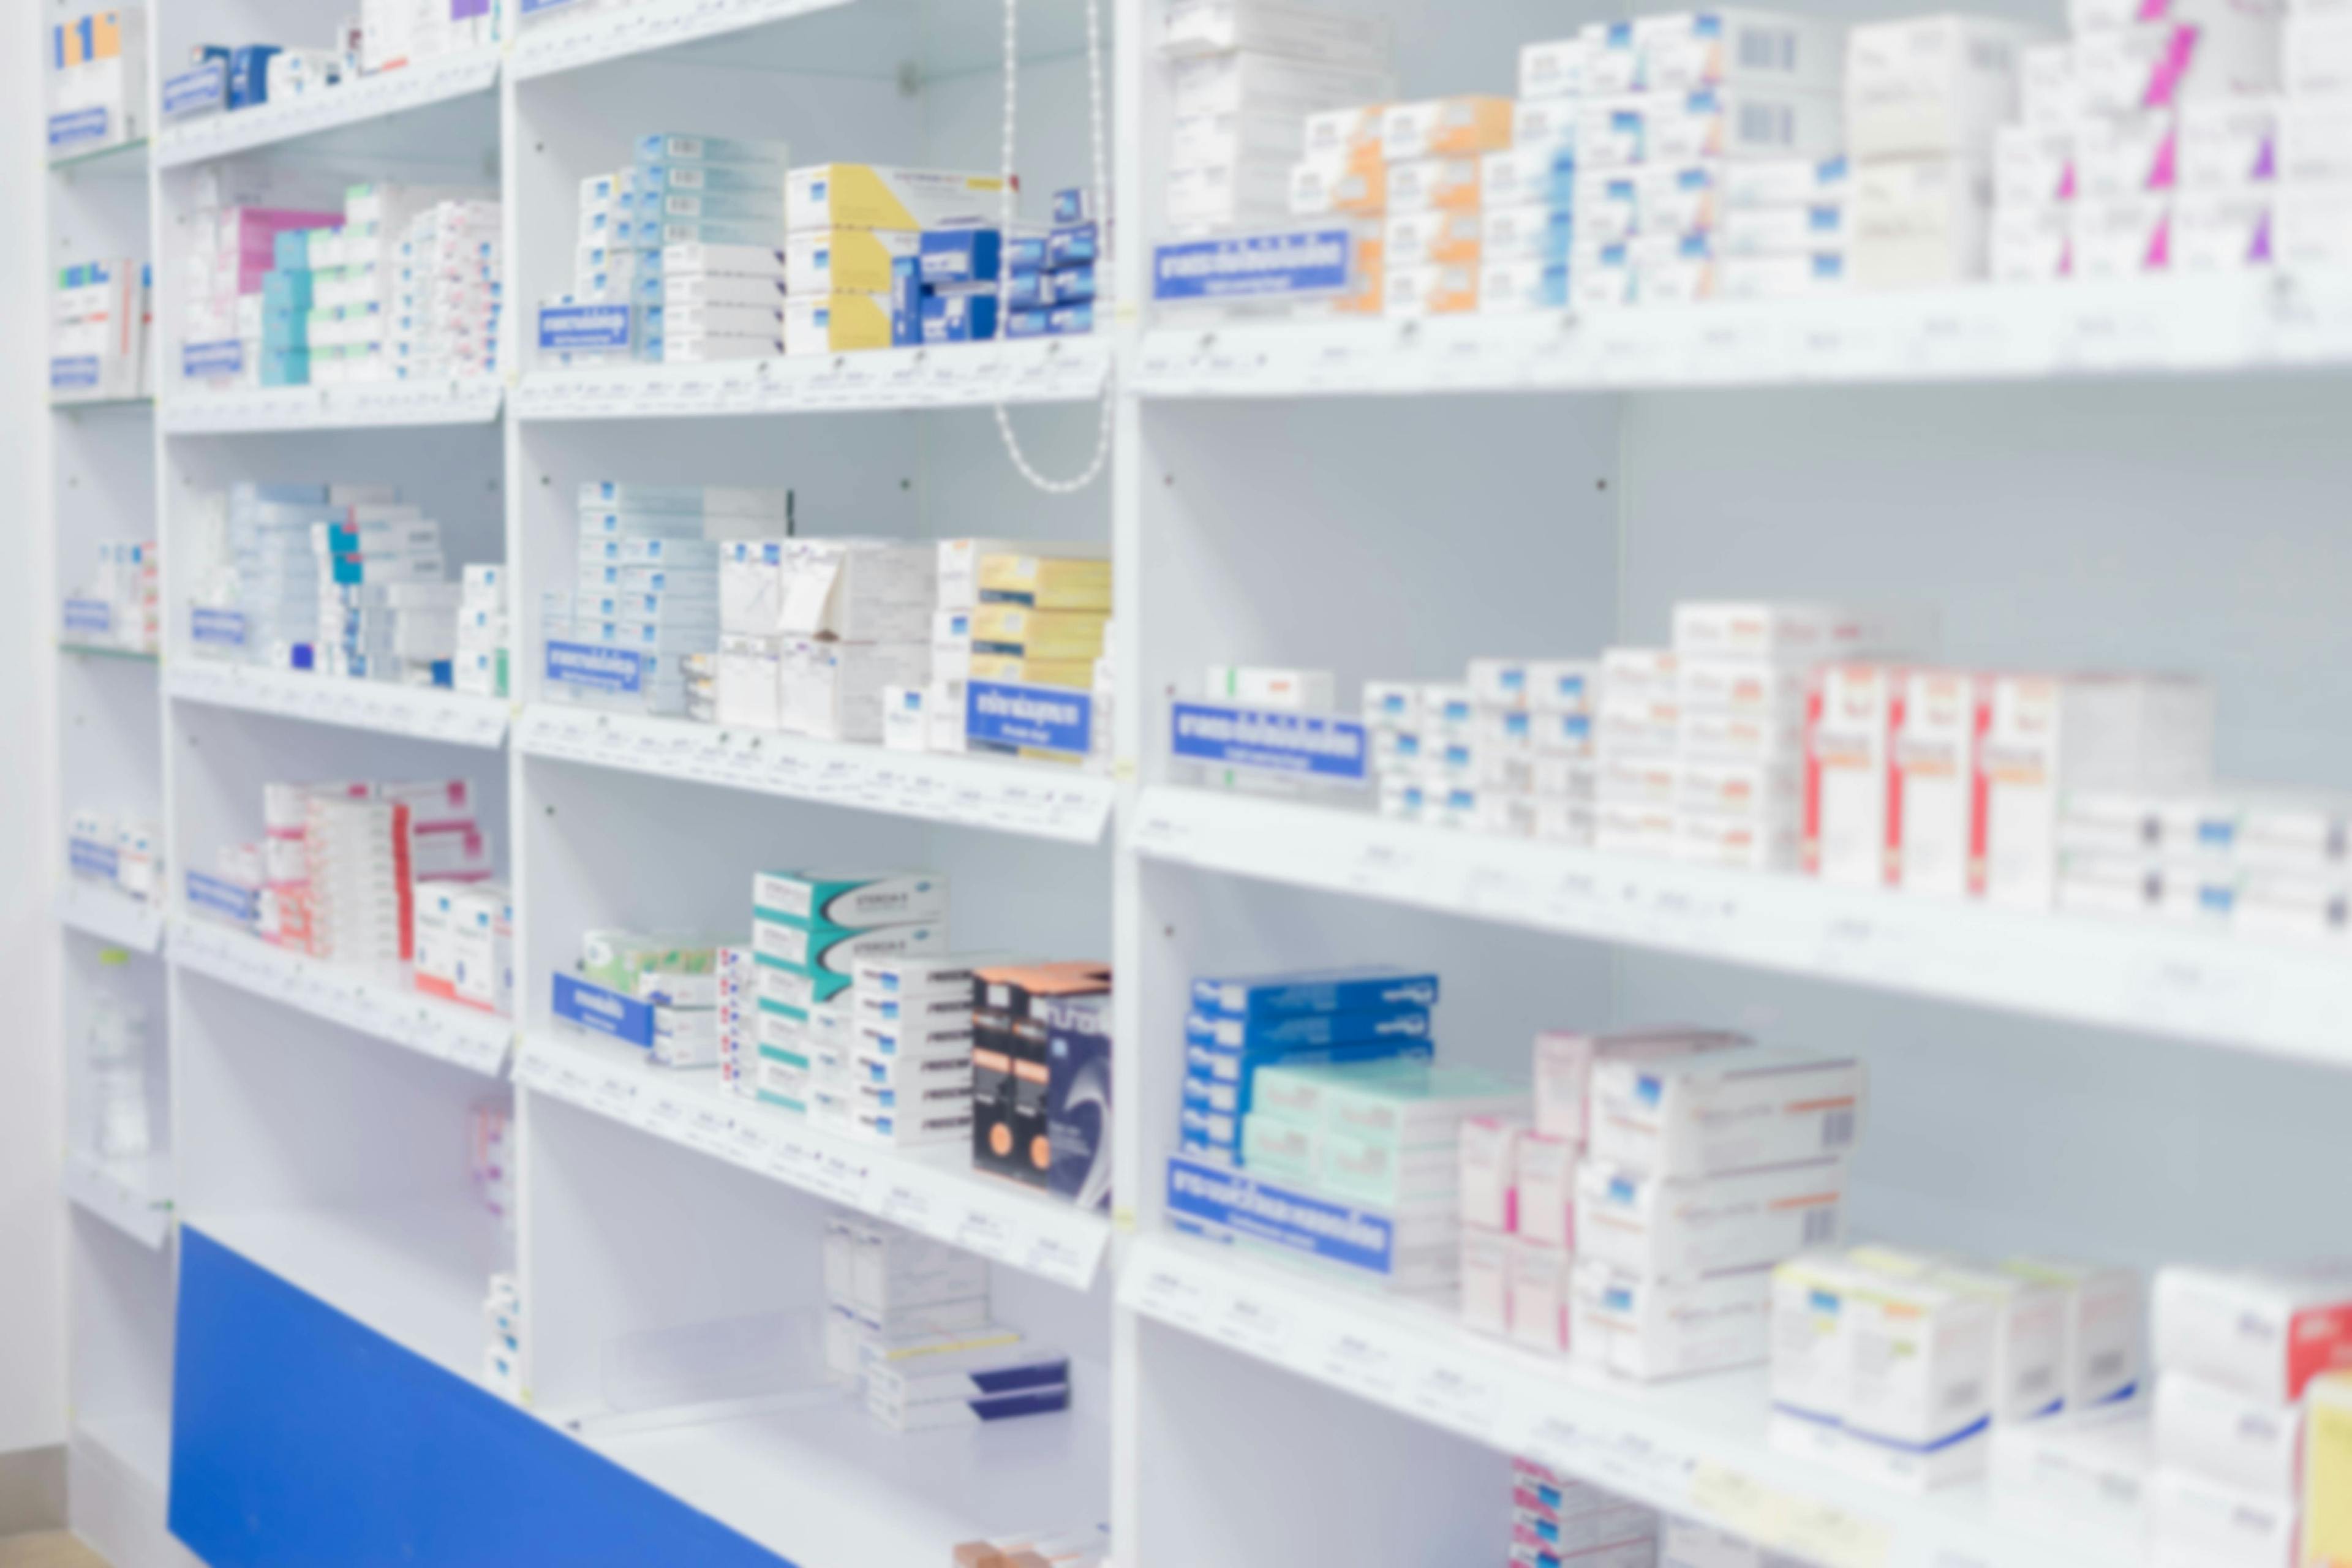 Medicines arranged in shelves, Pharmacy drugstore retail Interior blur abstract backbround with healthcare product on medicine cabinet - Image credit: kamol | stock.adobe.com